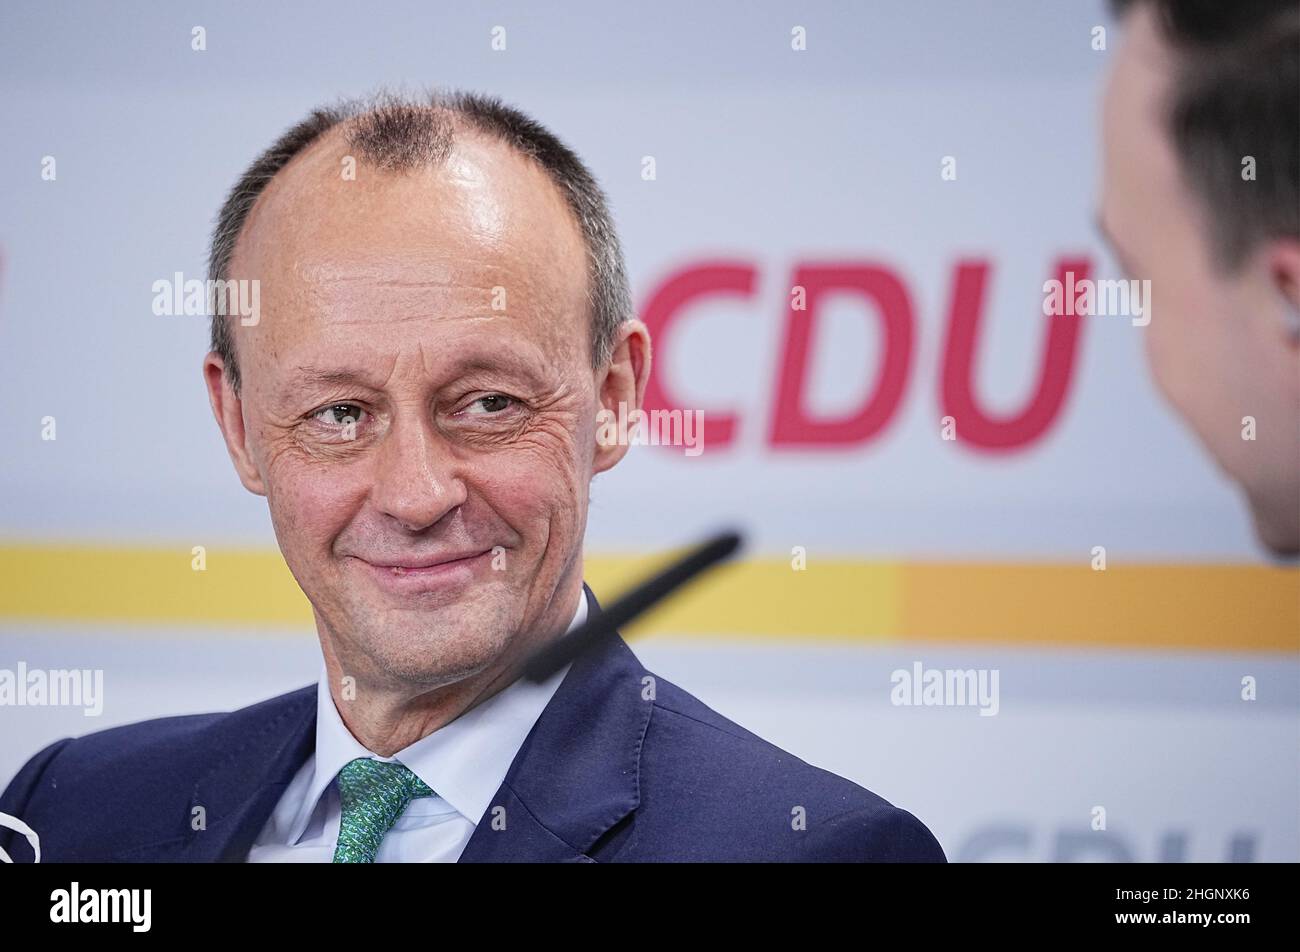 Berlin, Germany. 22nd Jan, 2022. Friedrich Merz, future federal chairman of the CDU, watches the CDU's federal party conference at the Konrad Adenauer House. At the 34th CDU party congress, Merz was elected as the new federal chairman. Due to the pandemic, the party congress is being held purely digitally. The result of the election must therefore still be confirmed by postal vote. (to dpa portrait 'Merz - with clear edge and conservative profile to CDU renewer') Credit: Michael Kappeler/dpa/Alamy Live News Stock Photo